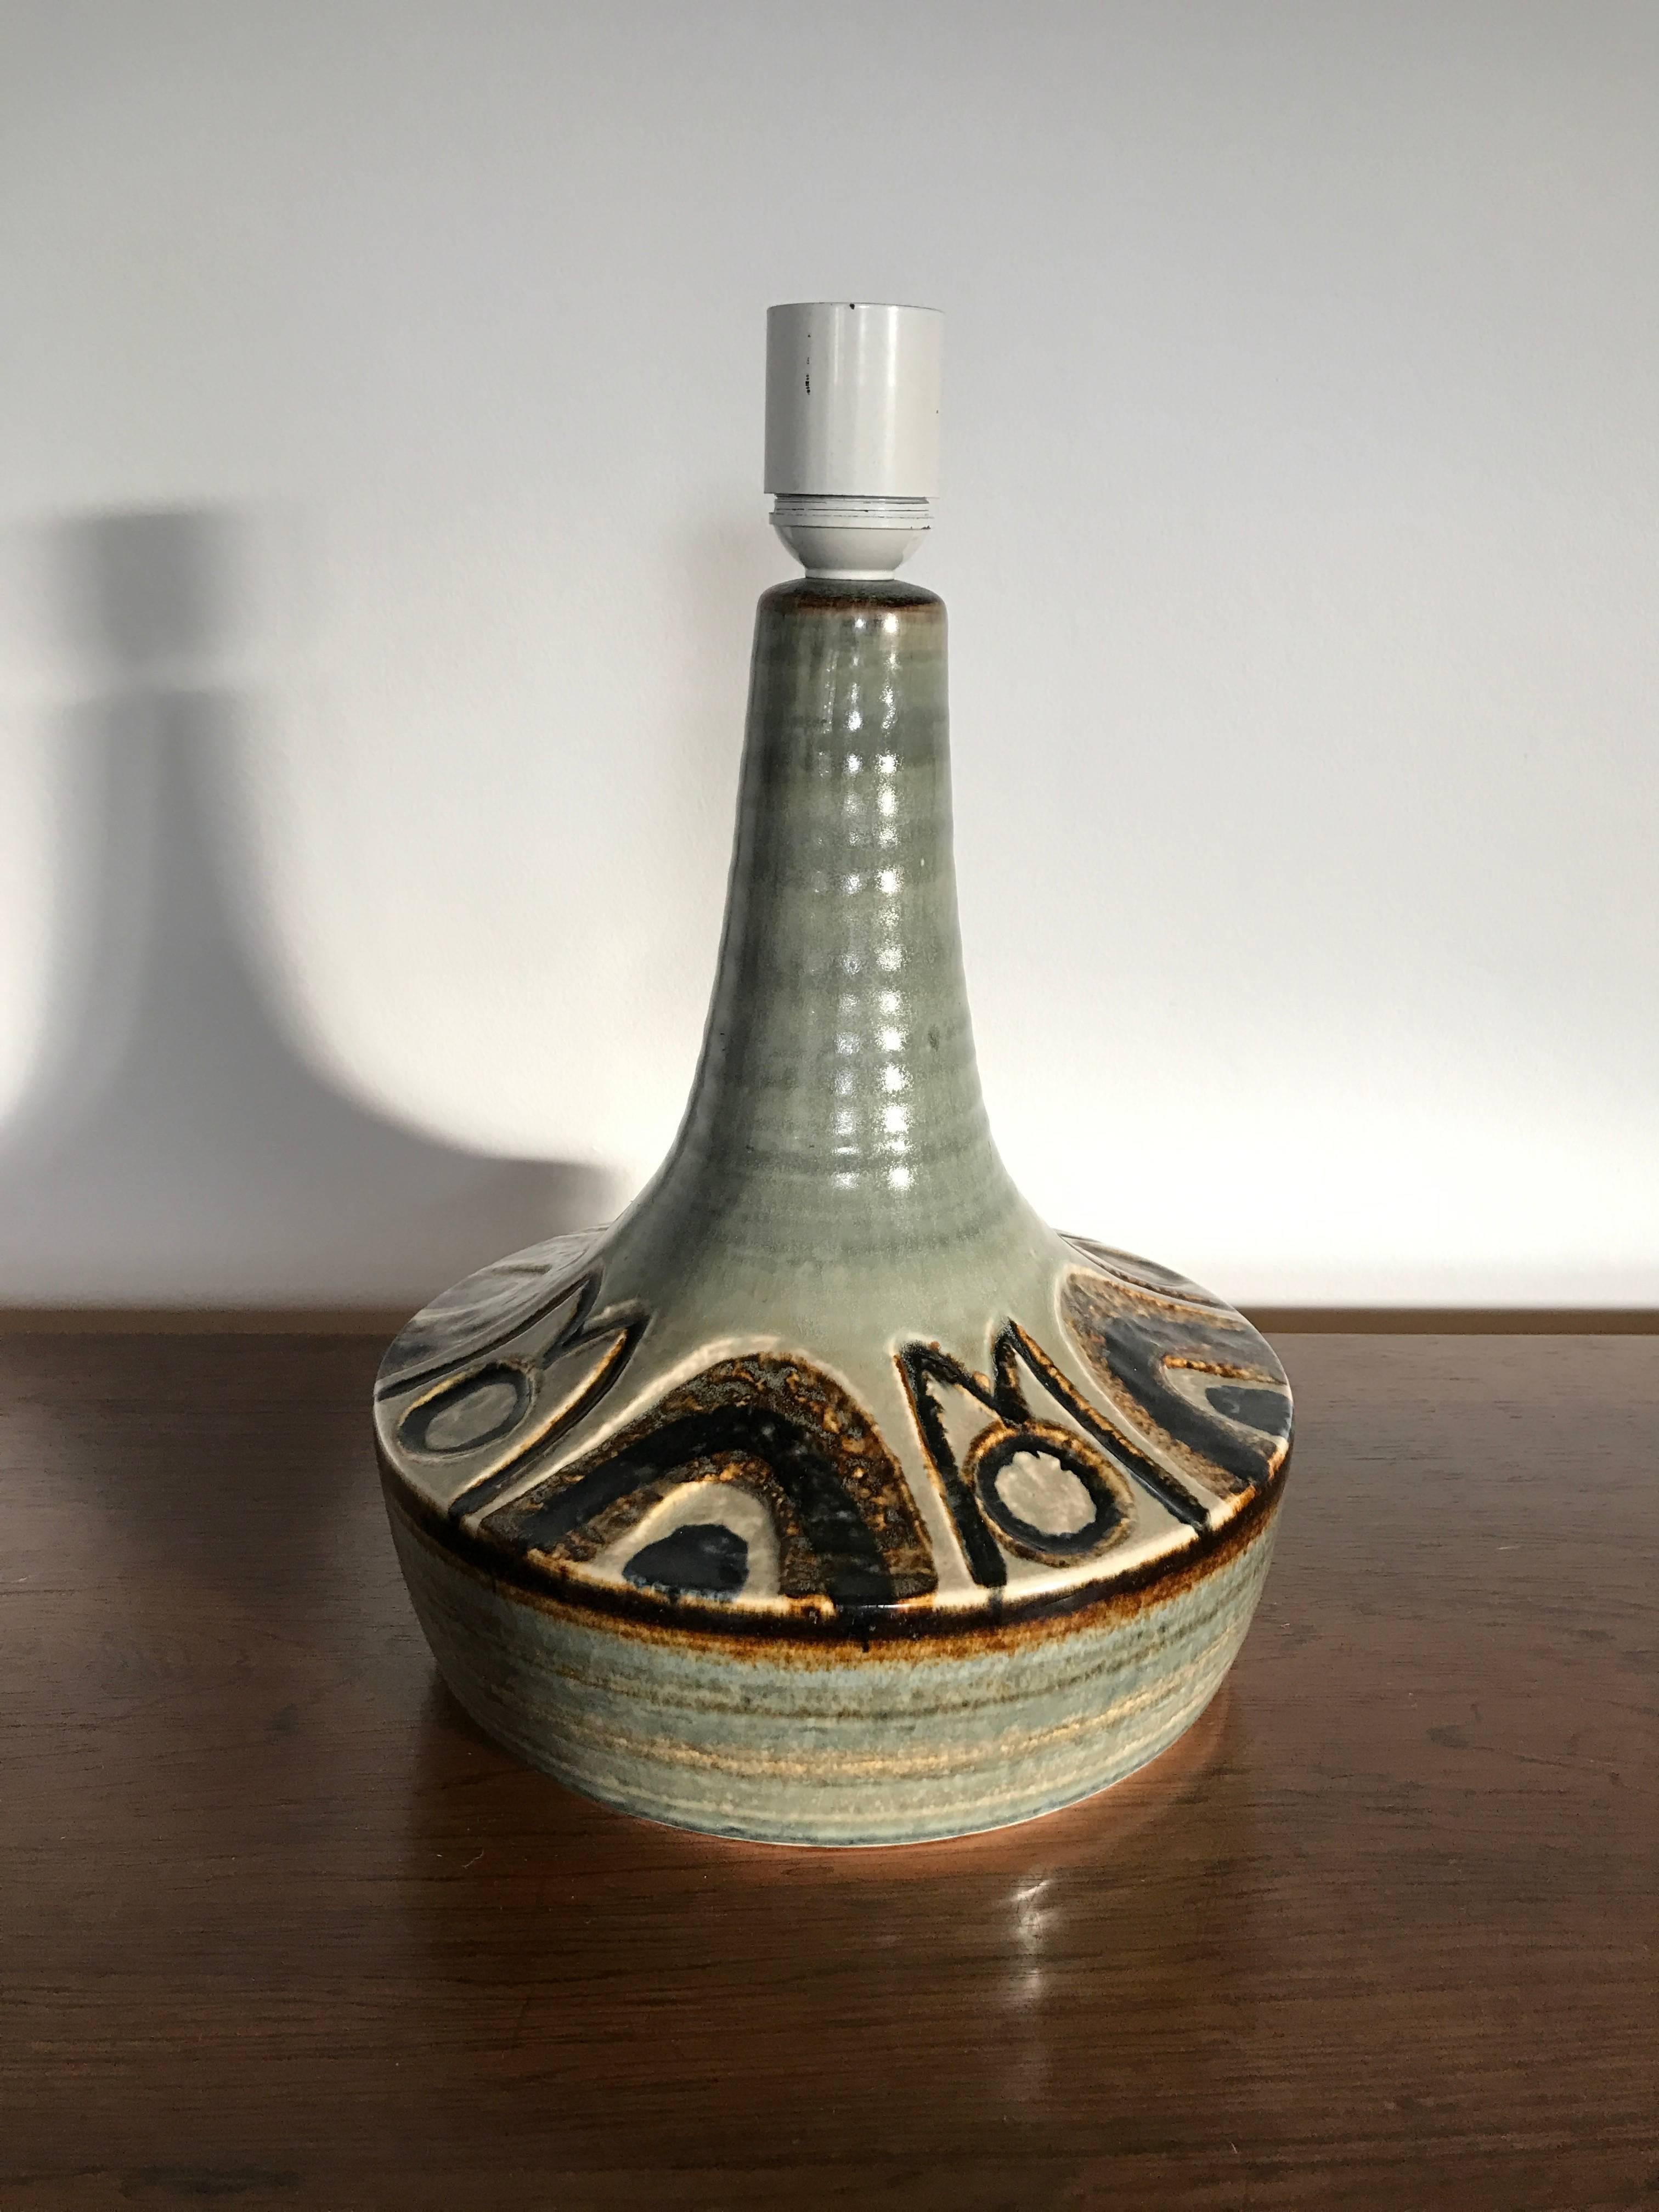 Glazed stoneware lamp from Søholm in a dusche green glaze, and on the base a brown/cream pattern, made in Denmark from the 1960s. Very good condition. Diameter/base 22 cm. and height 27 cm. without socket.